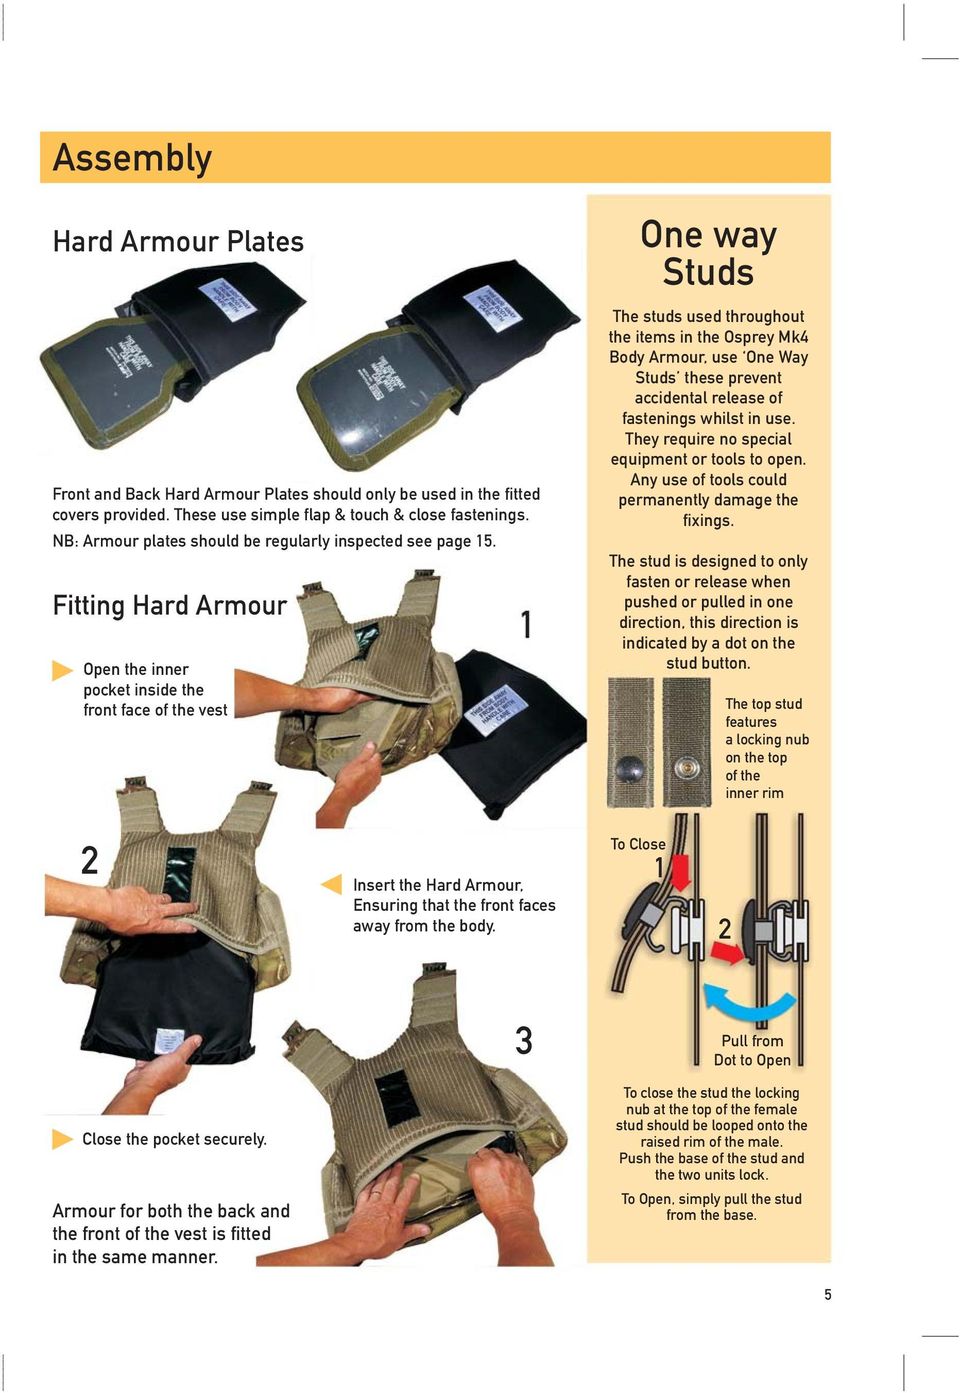 Fitting Hard Armour Open the inner pocket inside the front face of the vest One way Studs The studs used throughout the items in the Osprey Mk4 Body Armour, use One Way Studs these prevent accidental